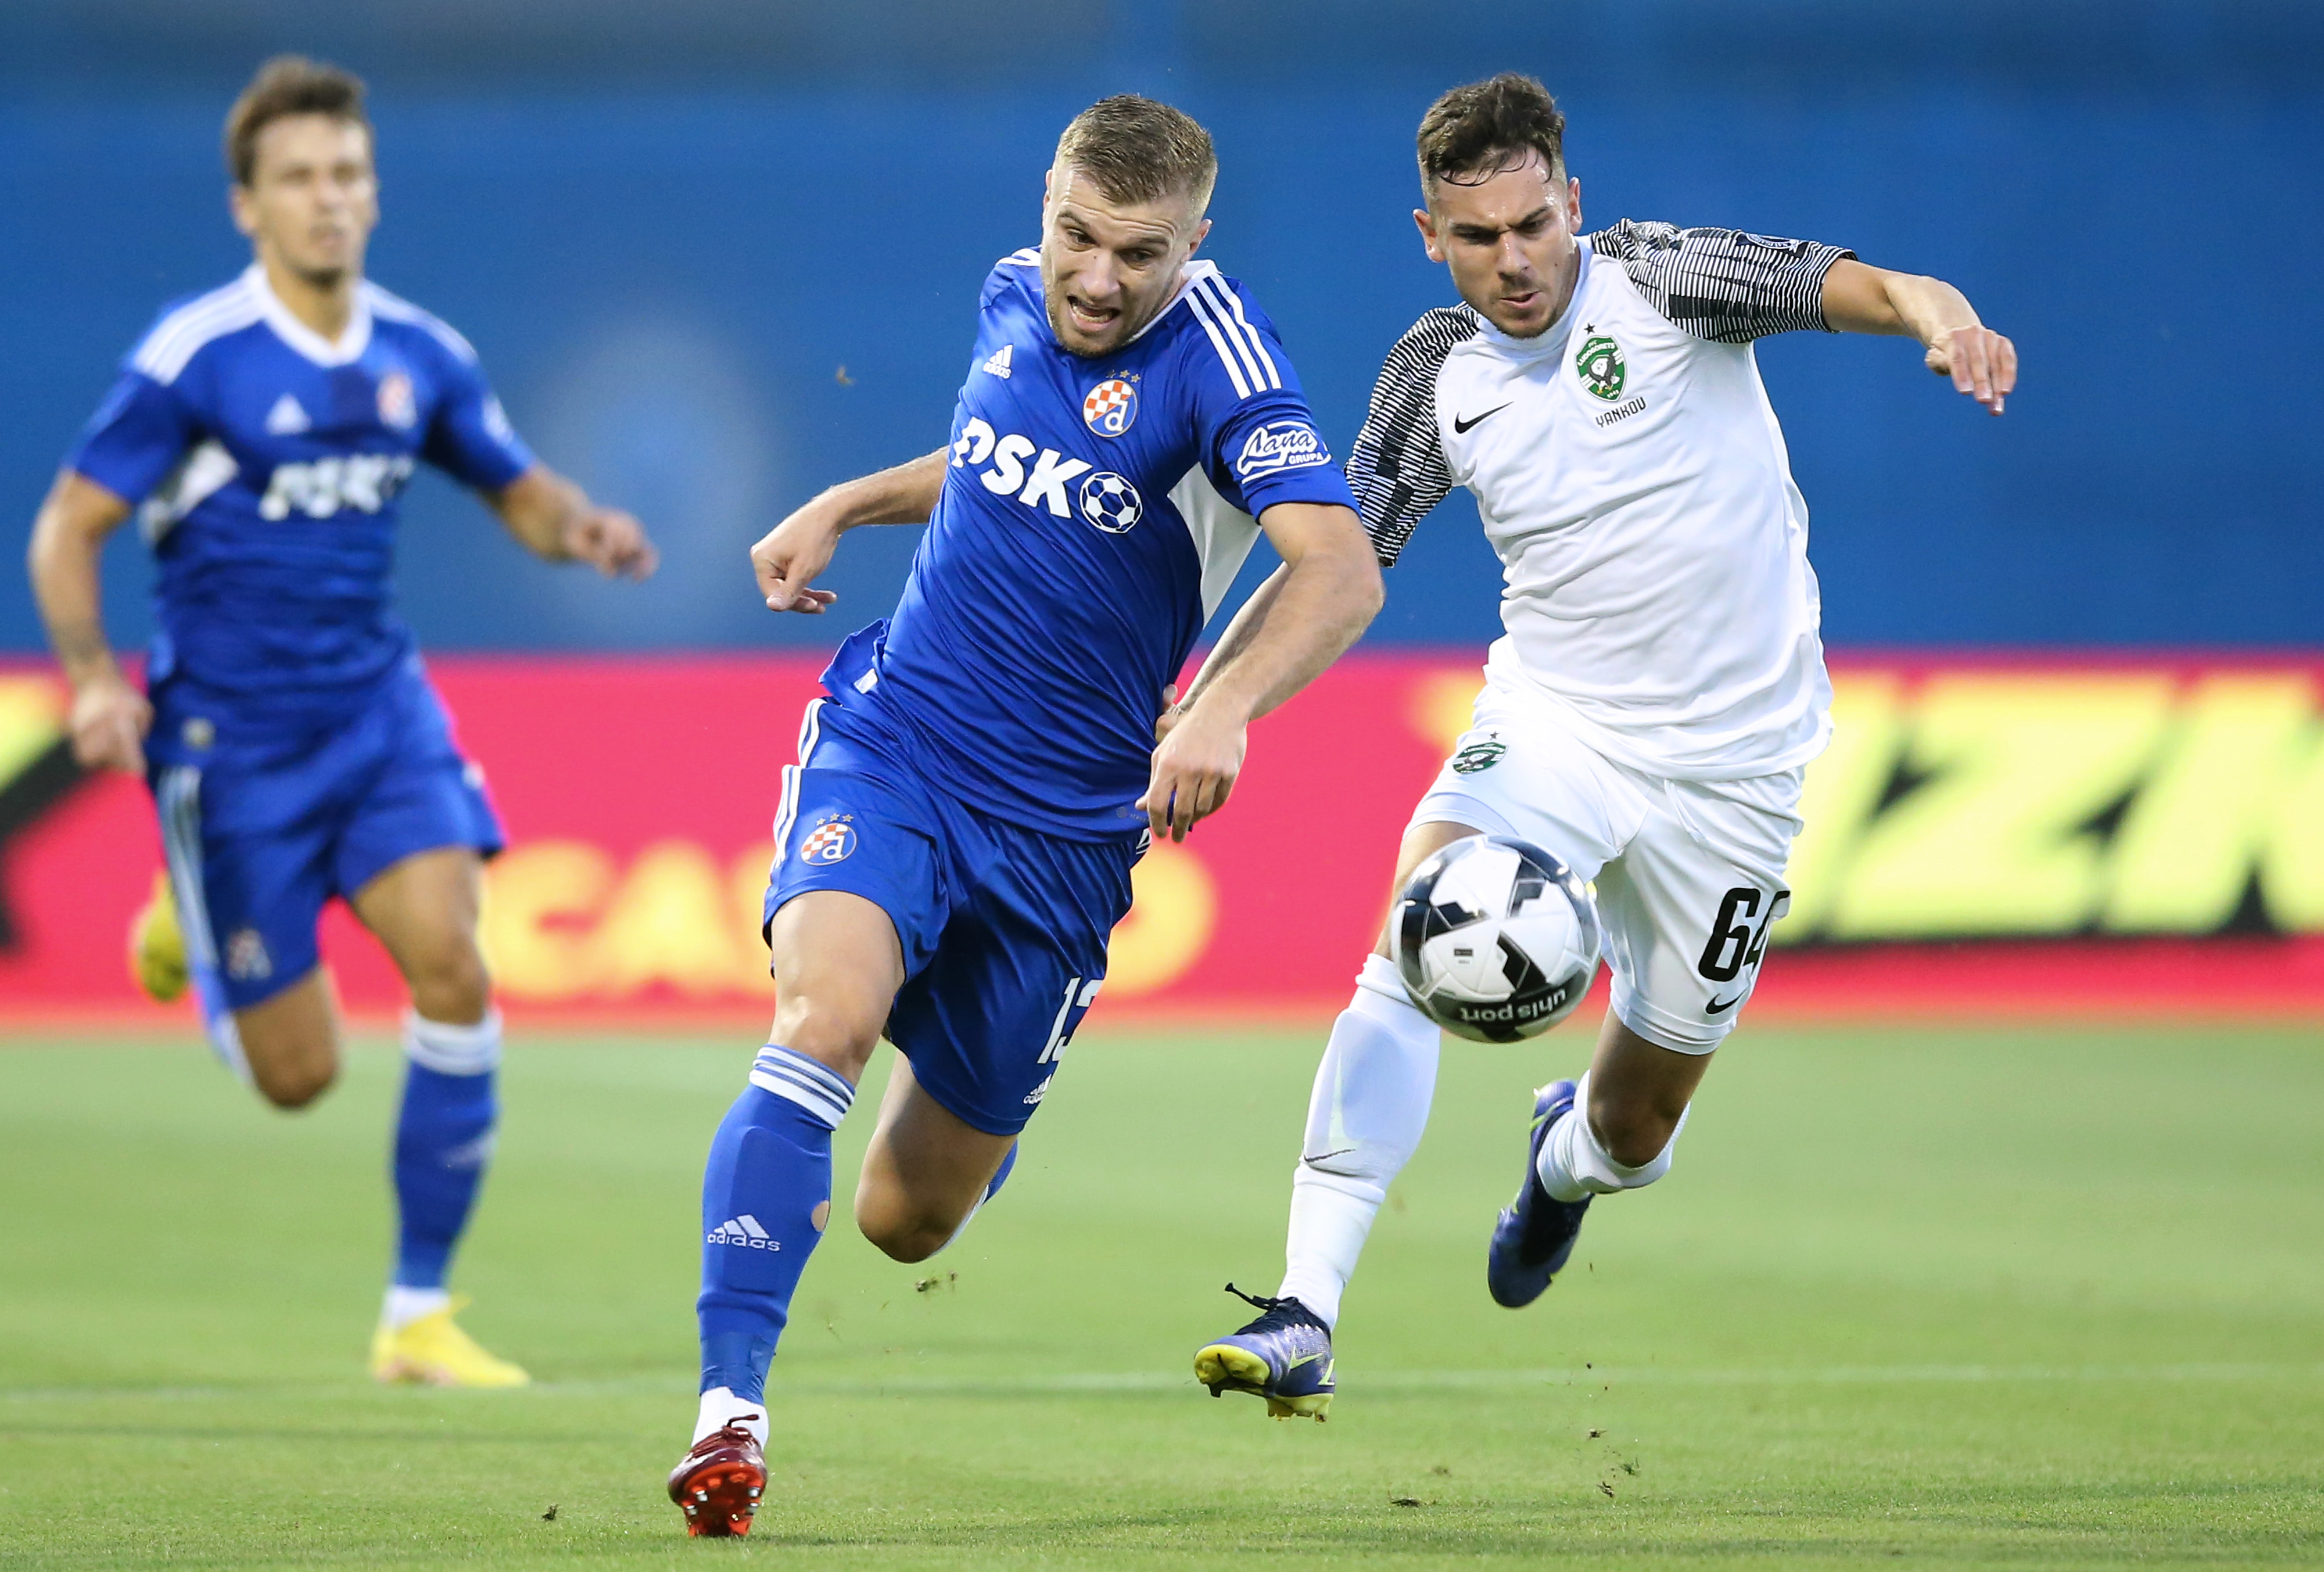 Dominic Yankov of Ludogorets competes for the ball with Stefan Ristovski of Dinamo Zagreb.